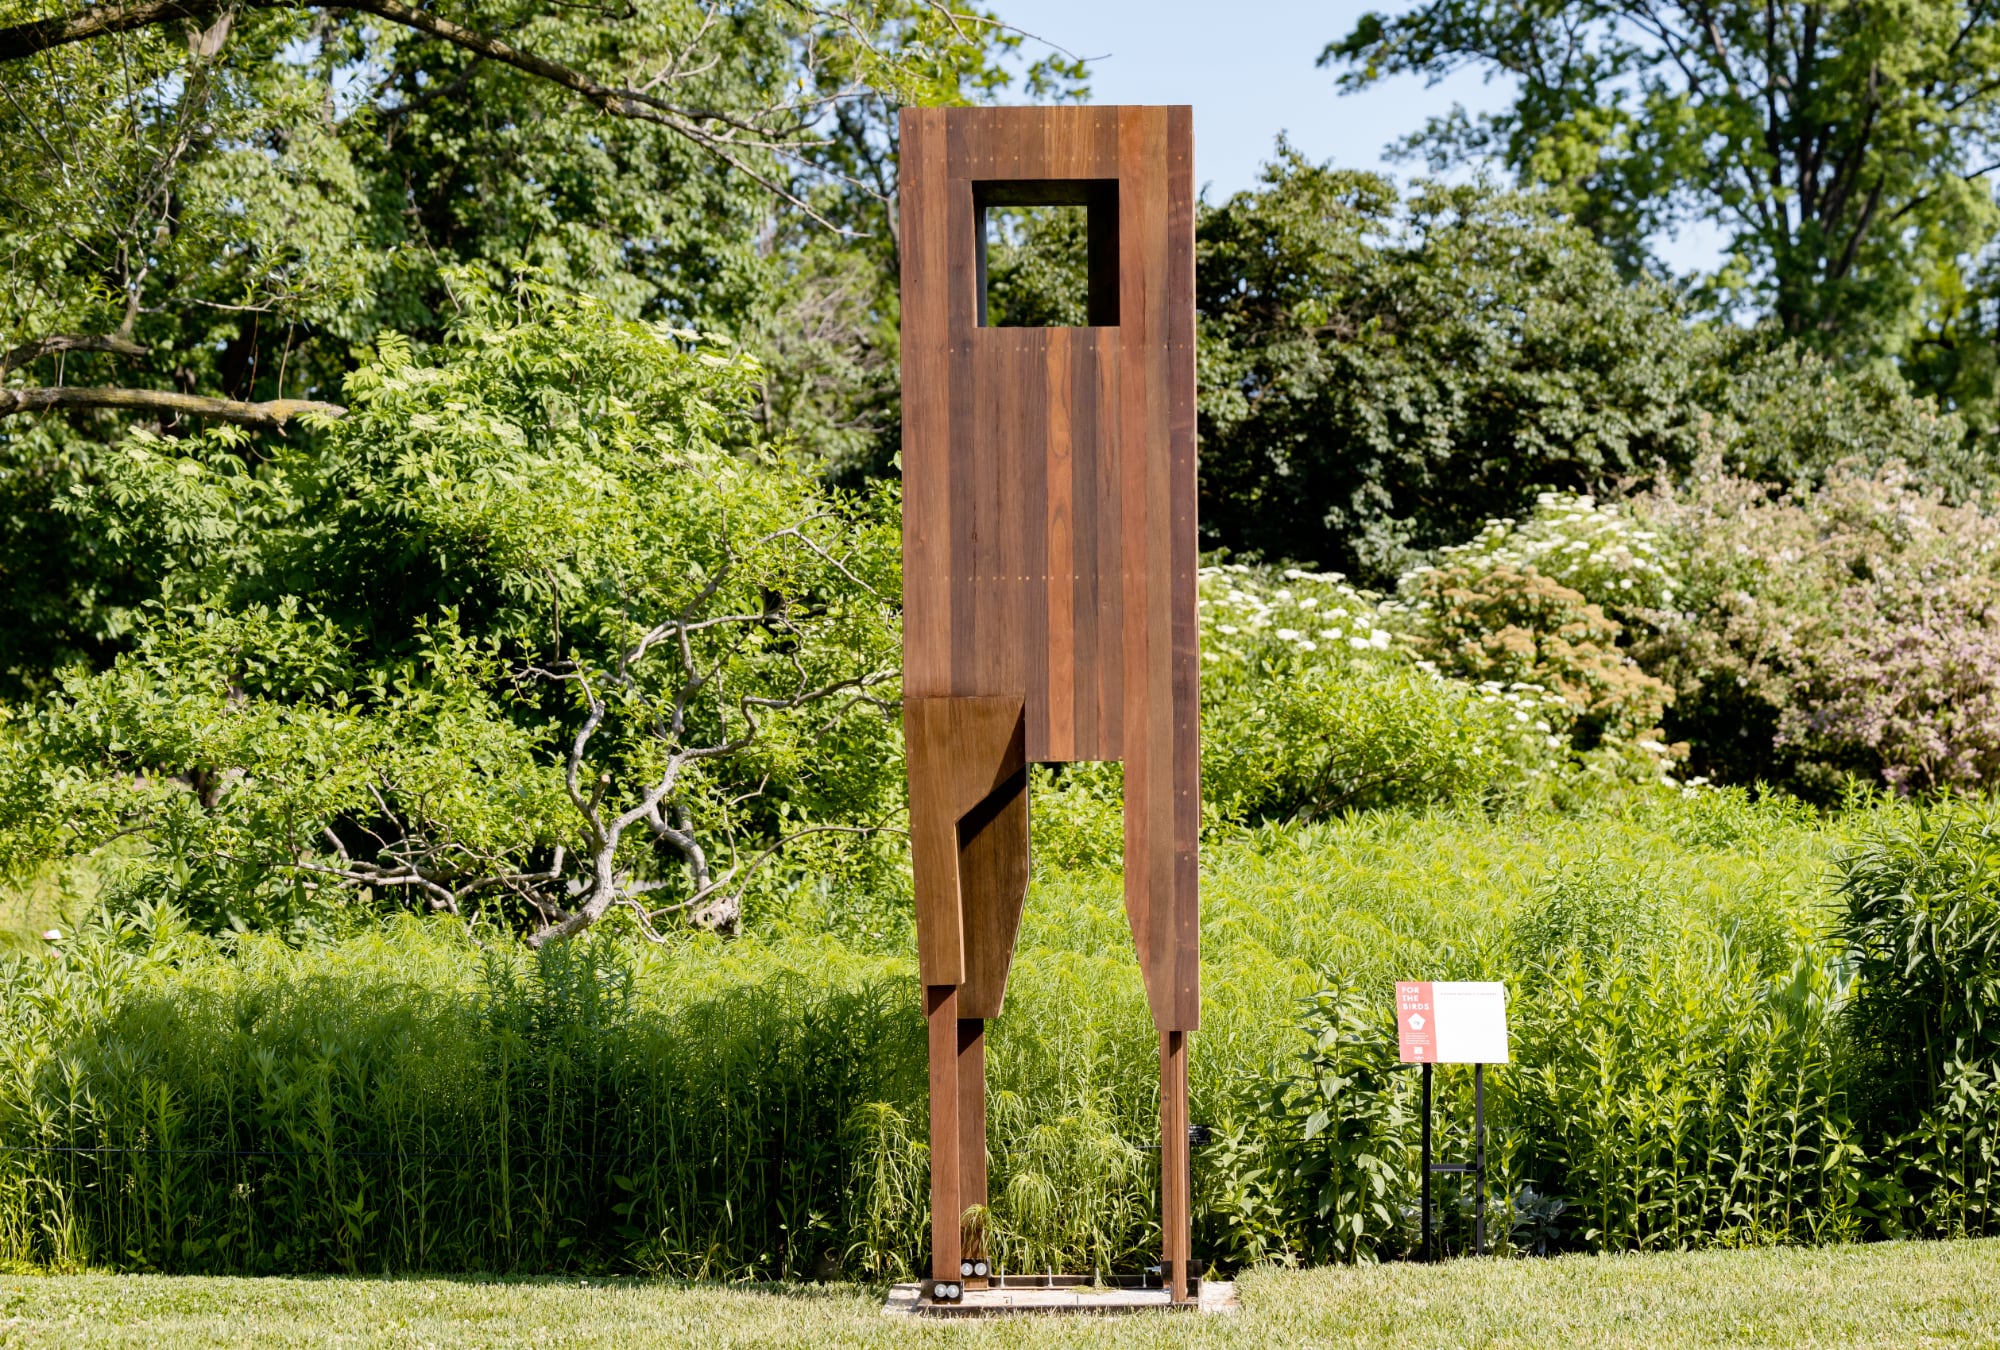 Some of the bird cages on display during the event were created taking into account certain species. Like the bird's nest was designed by Kyle May Architect, who thinks about the relationship between crows and scarecrows. Wood material was chosen to create a bird's nest structure that allows crows to roost. This birdhouse stands up to 3 meters high.